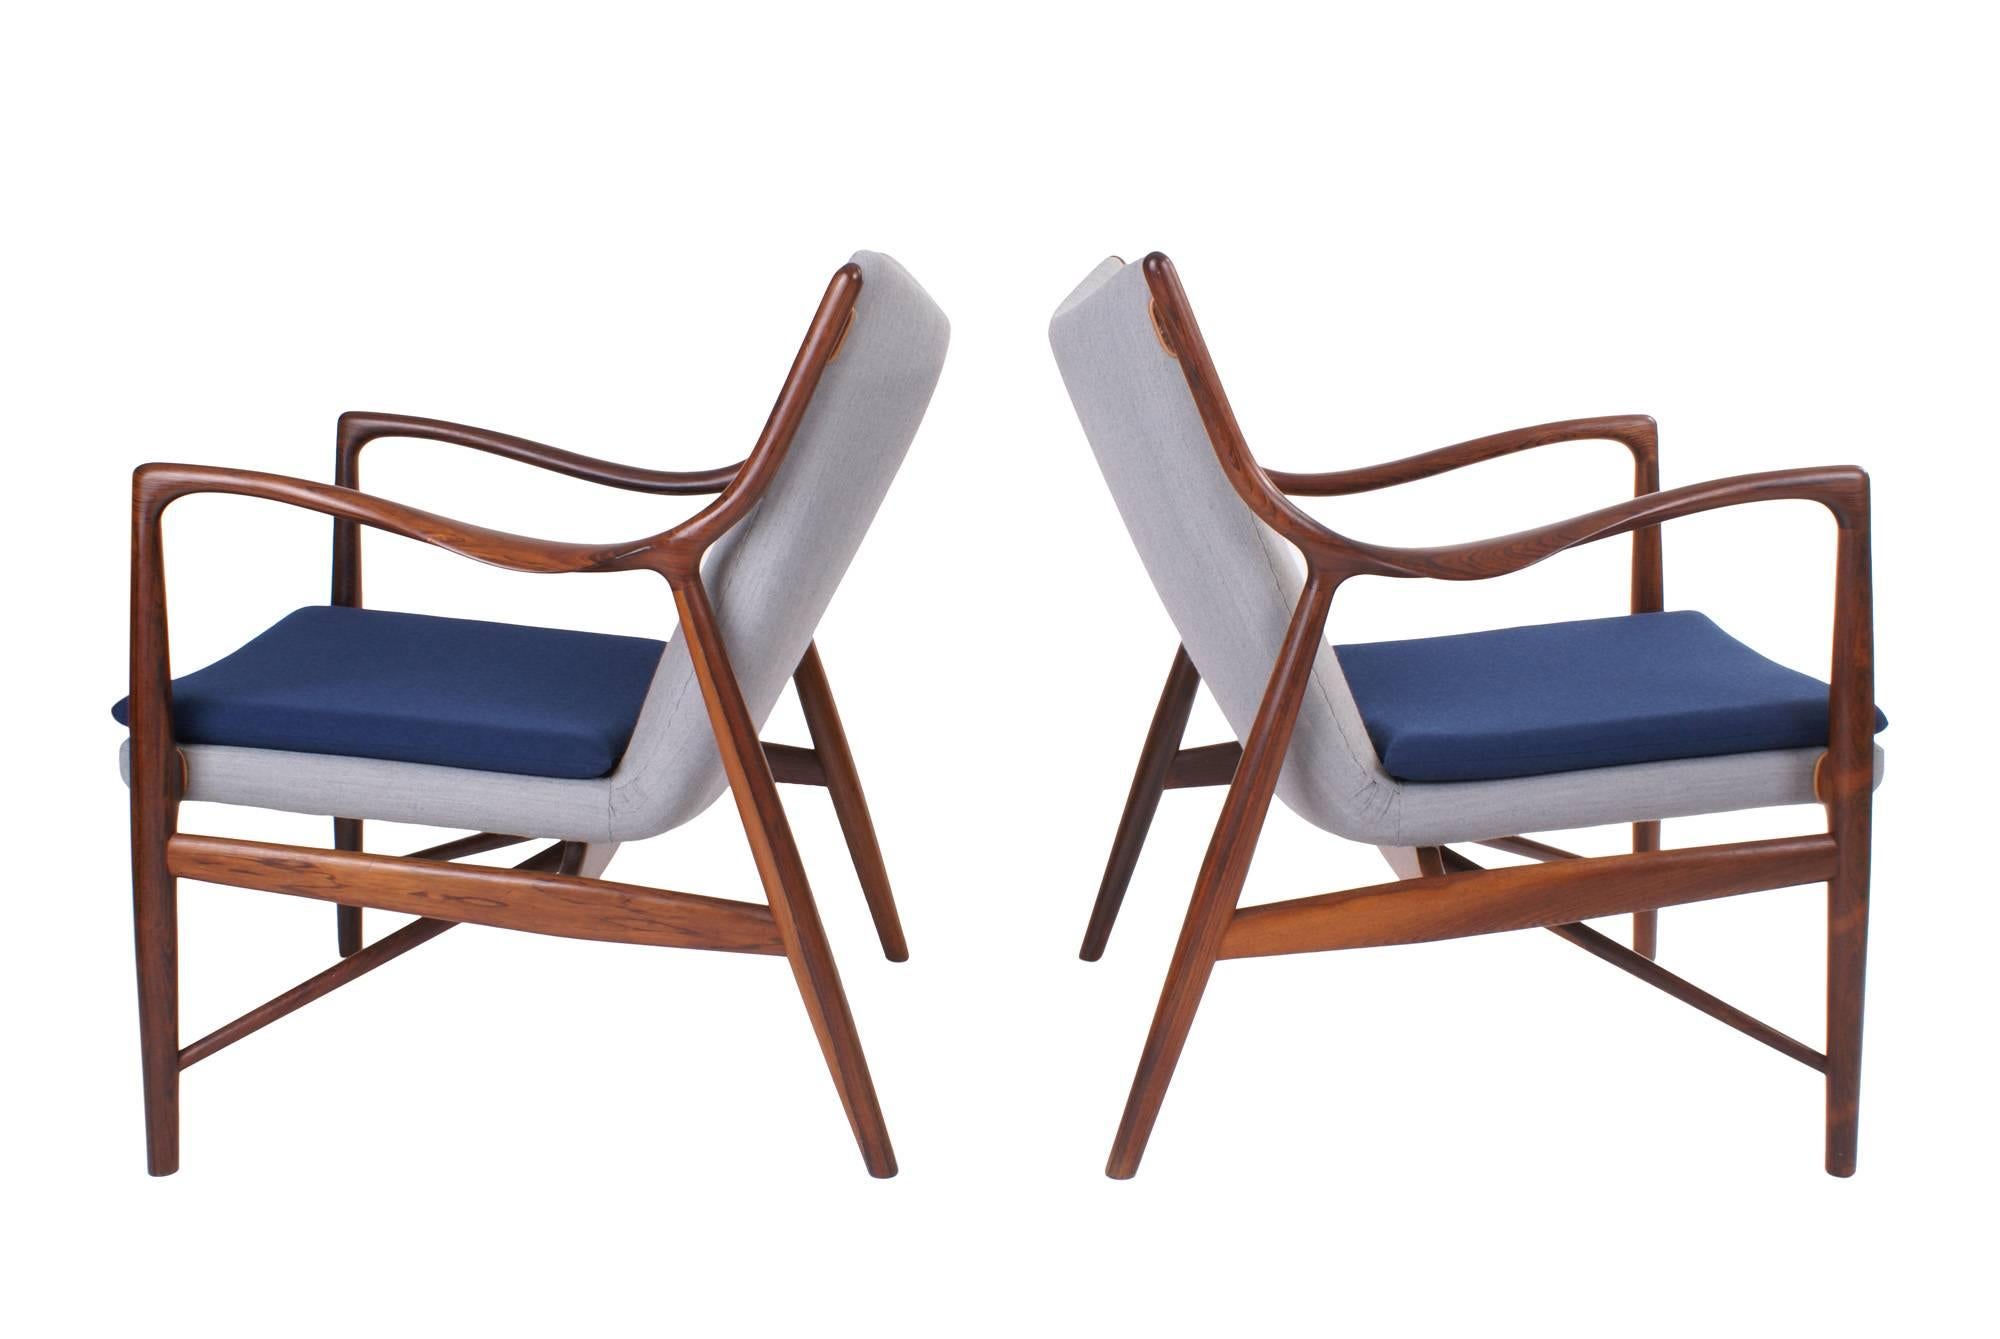 Pair of rare Finn Juhl NV45 chairs in rosewood made and stamped from master cabinetmaker Niels Vodder. Designed 1945.

This pair of chairs is in excellent condition with no cracks or repairs to the frames. The chairs are re-upholstered in fabric.